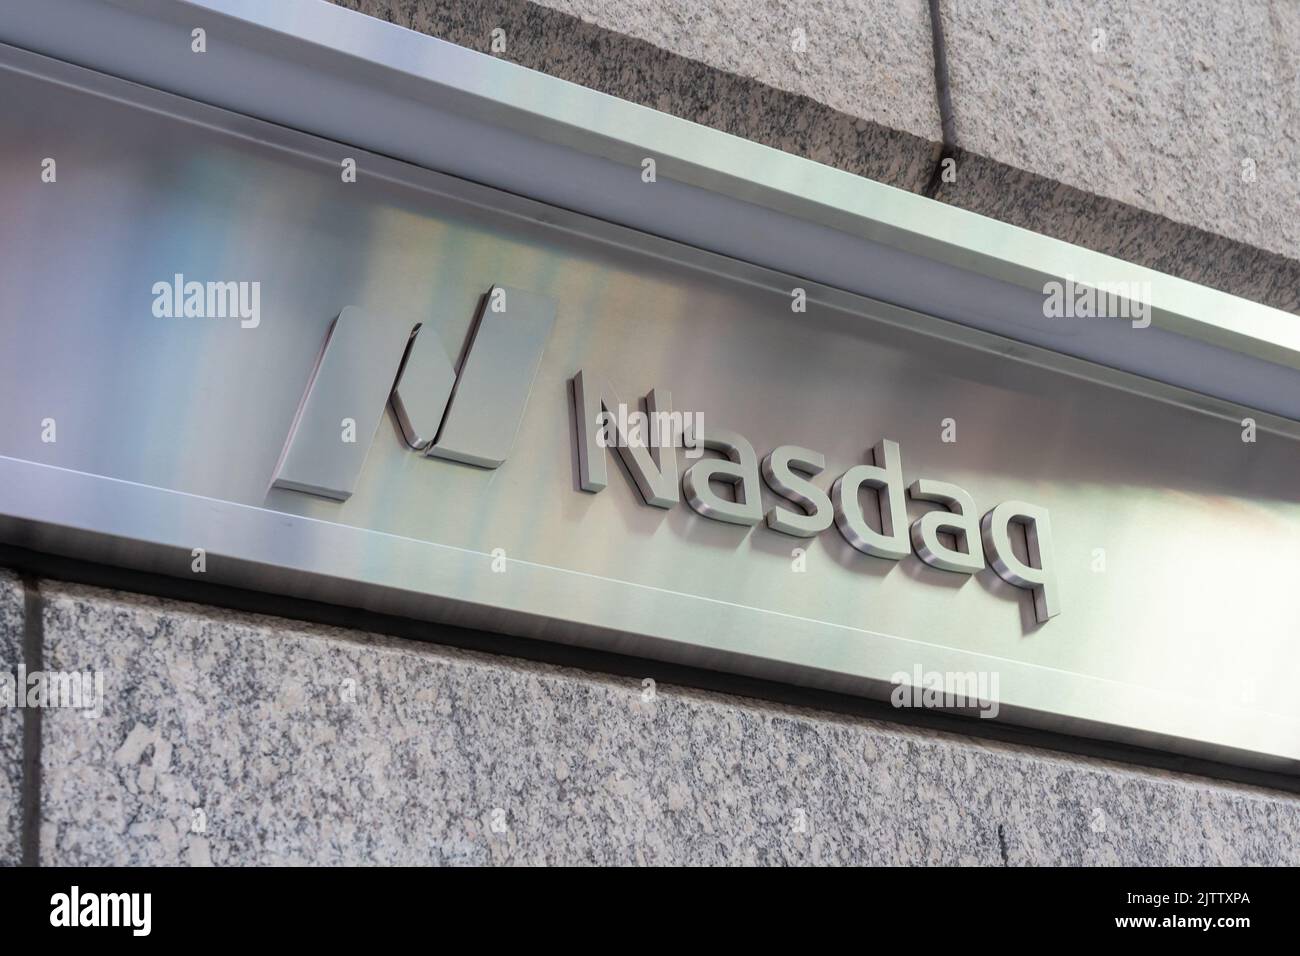 New York, NY, USA - August 18, 2022: The Nasdaq sign is seen at its headquarters in New York, NY, USA, August 18, 2022. Stock Photo